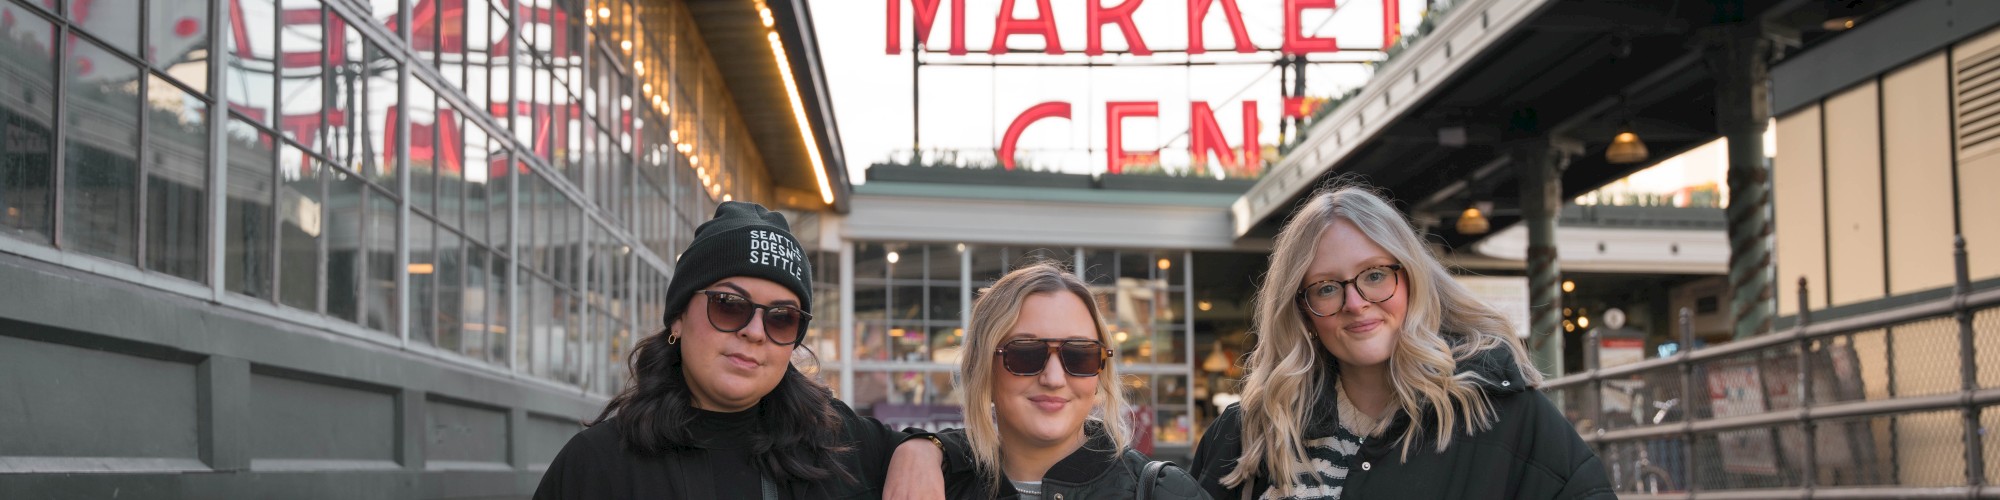 Three people stand in front of the Public Market Center sign, smiling and wearing sunglasses and jackets.